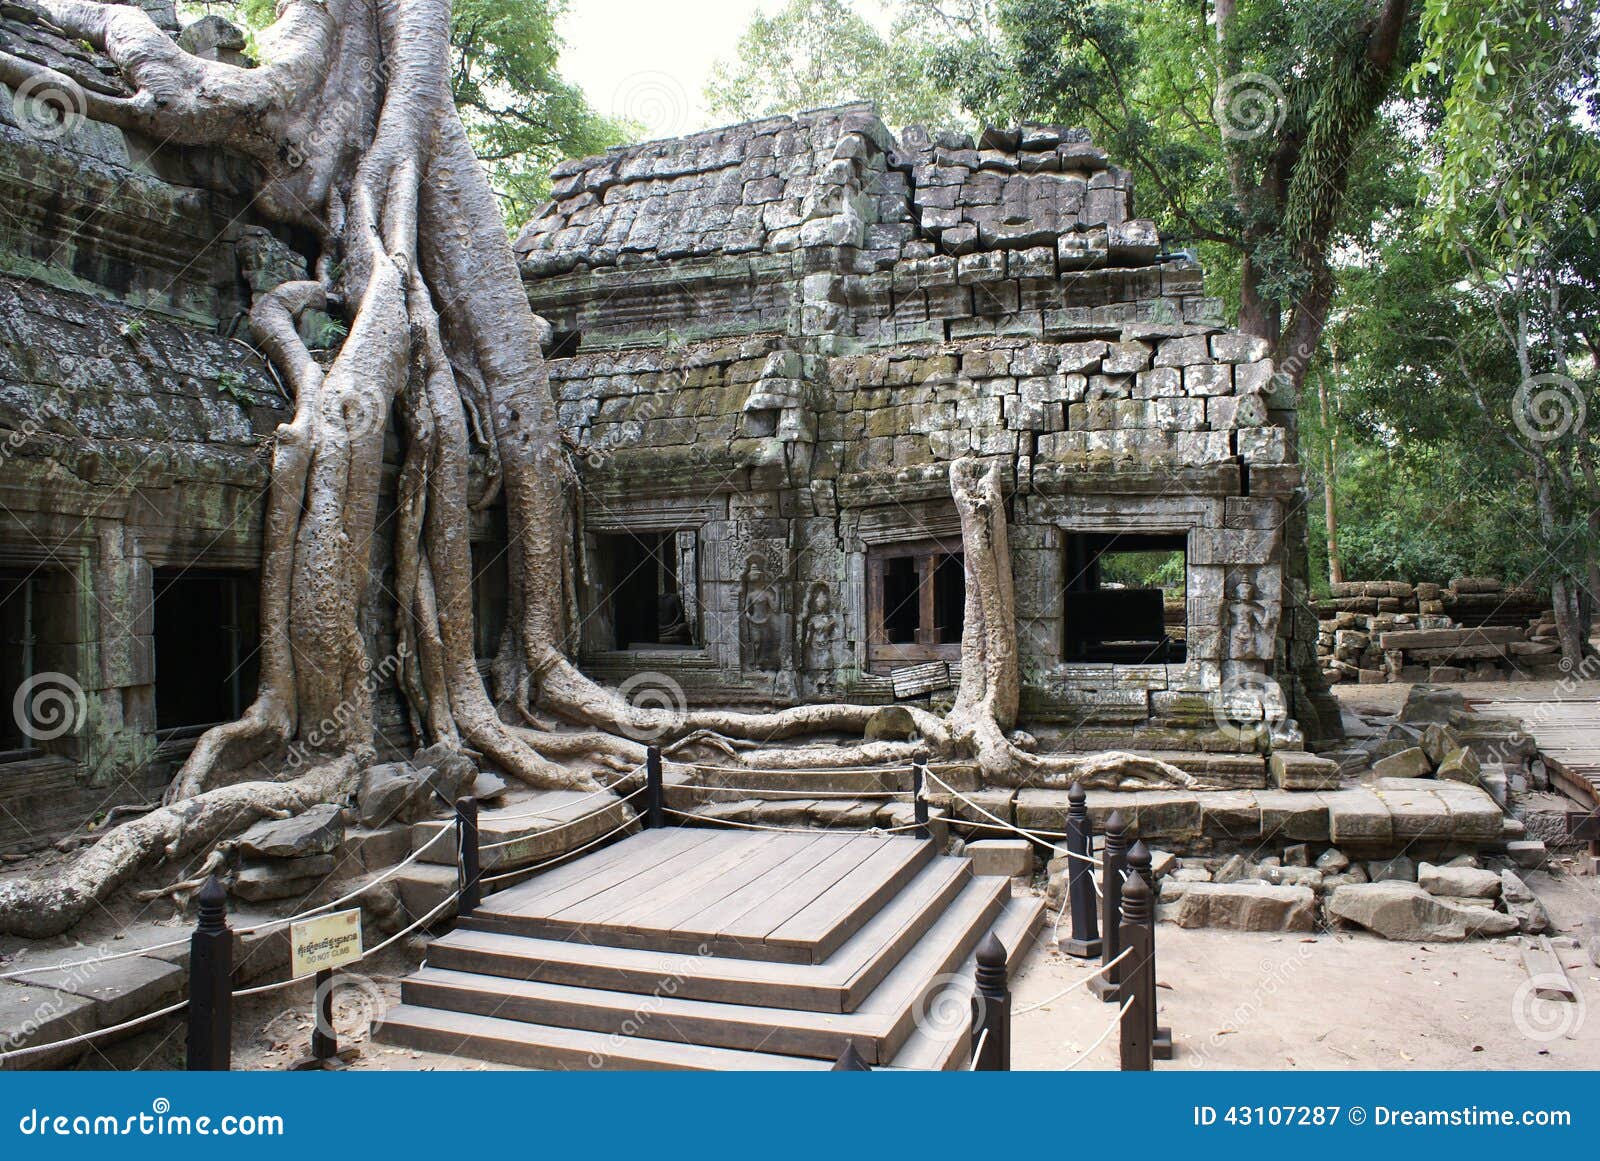 Ta Prohm Angkor. Ta Prohm temple Anghor in Cambodia. The work of Jayavarman VII and dedicated to Buddhism. Many buildings are covered with roots of the banyan and kapok trees.